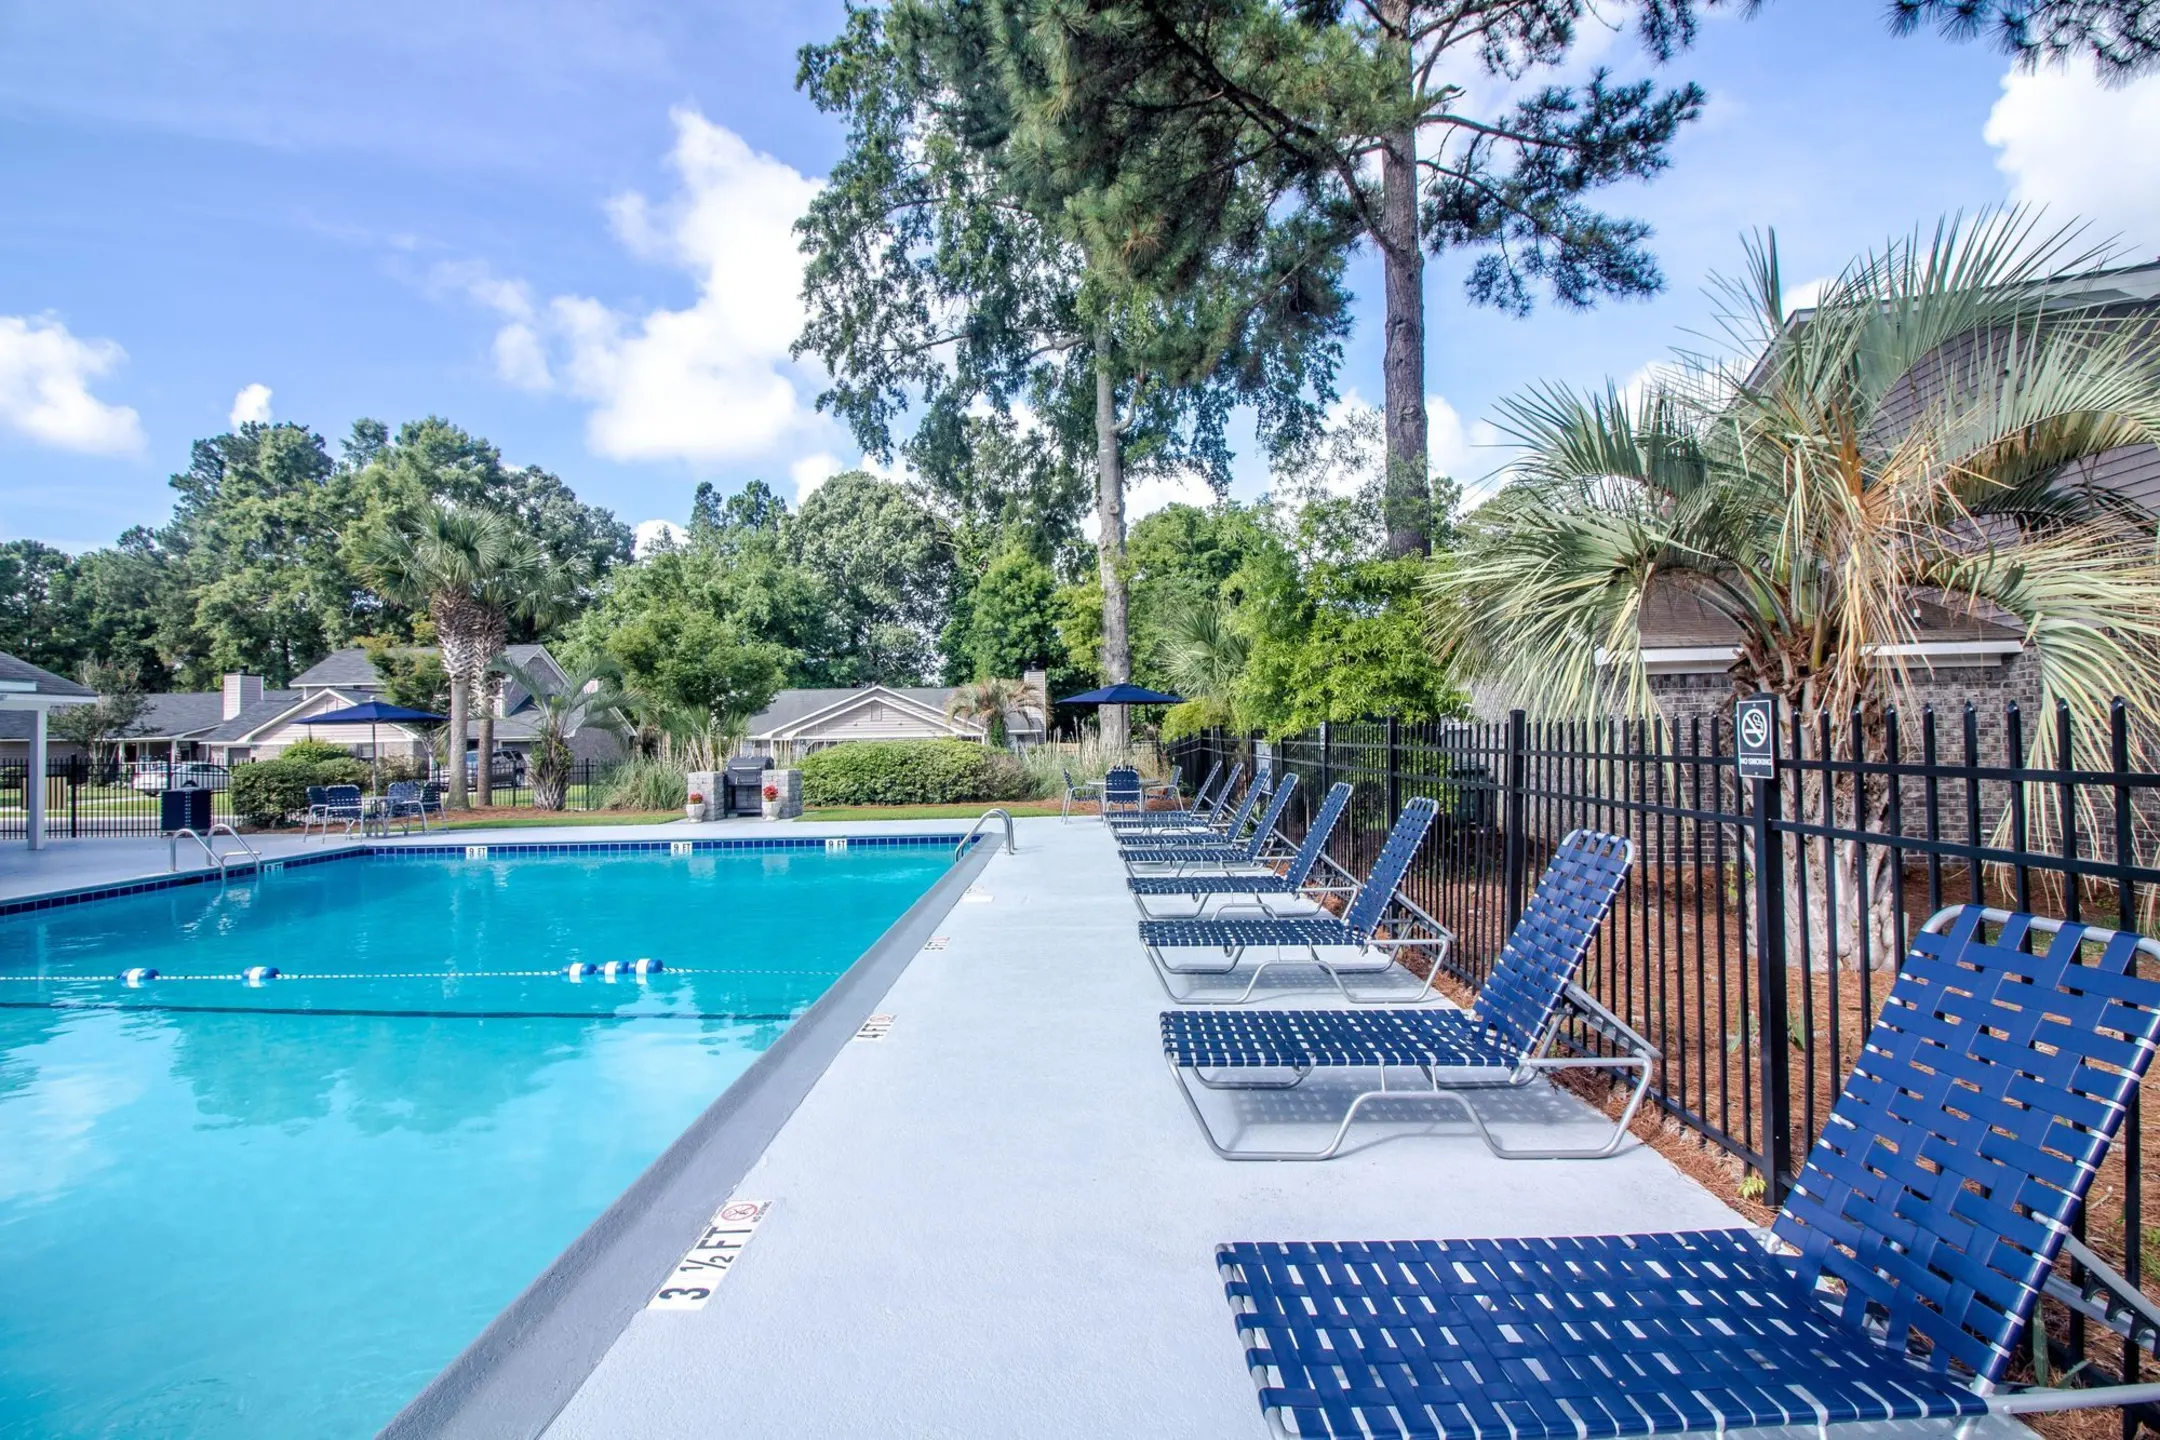 Pool - The Cottages At Crowfield - Ladson, SC